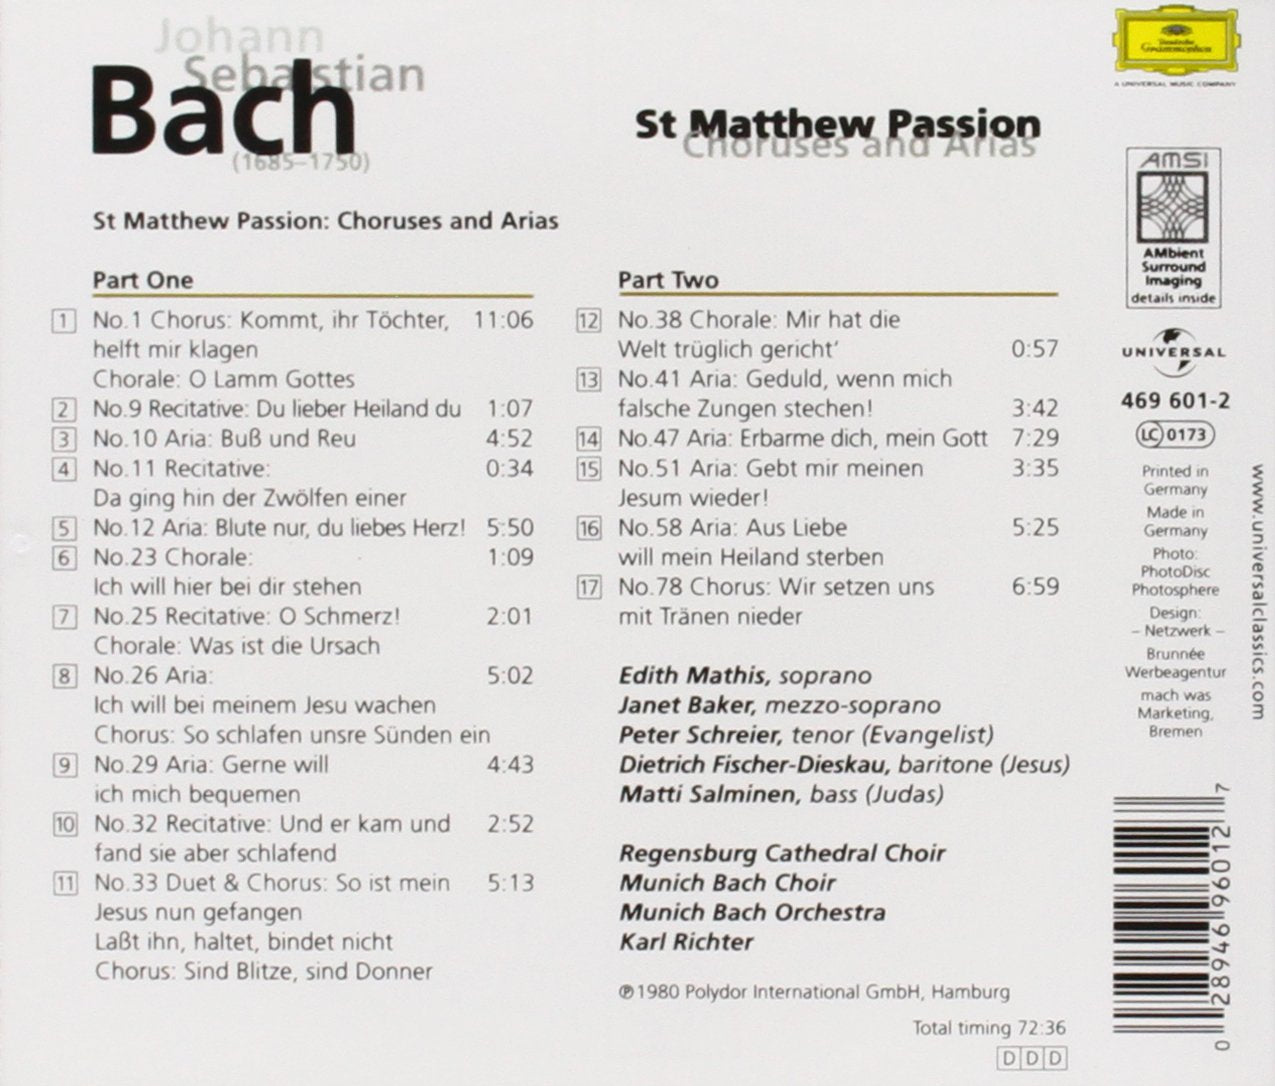 BACH: CHORUSES AND ARIAS FROM ST. MATTHEW PASSION - RICHTER, MUNICH BACH ORCHESTRA